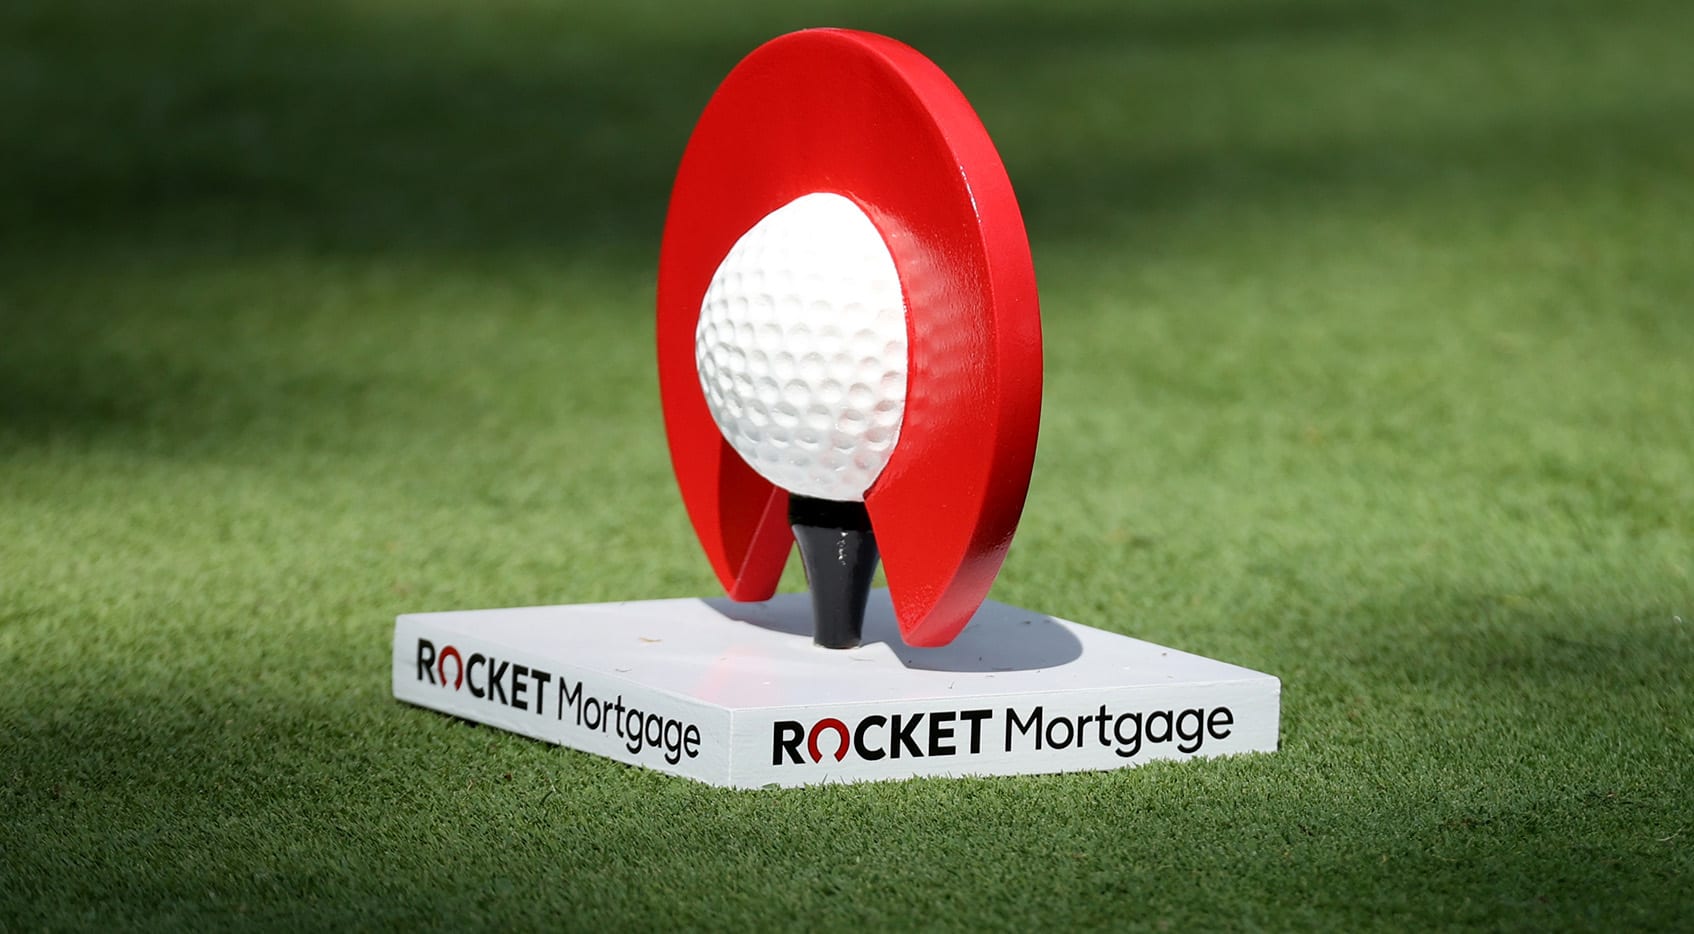 How to Watch the Rocket Mortgage Classic, Round 1 Featured Groups